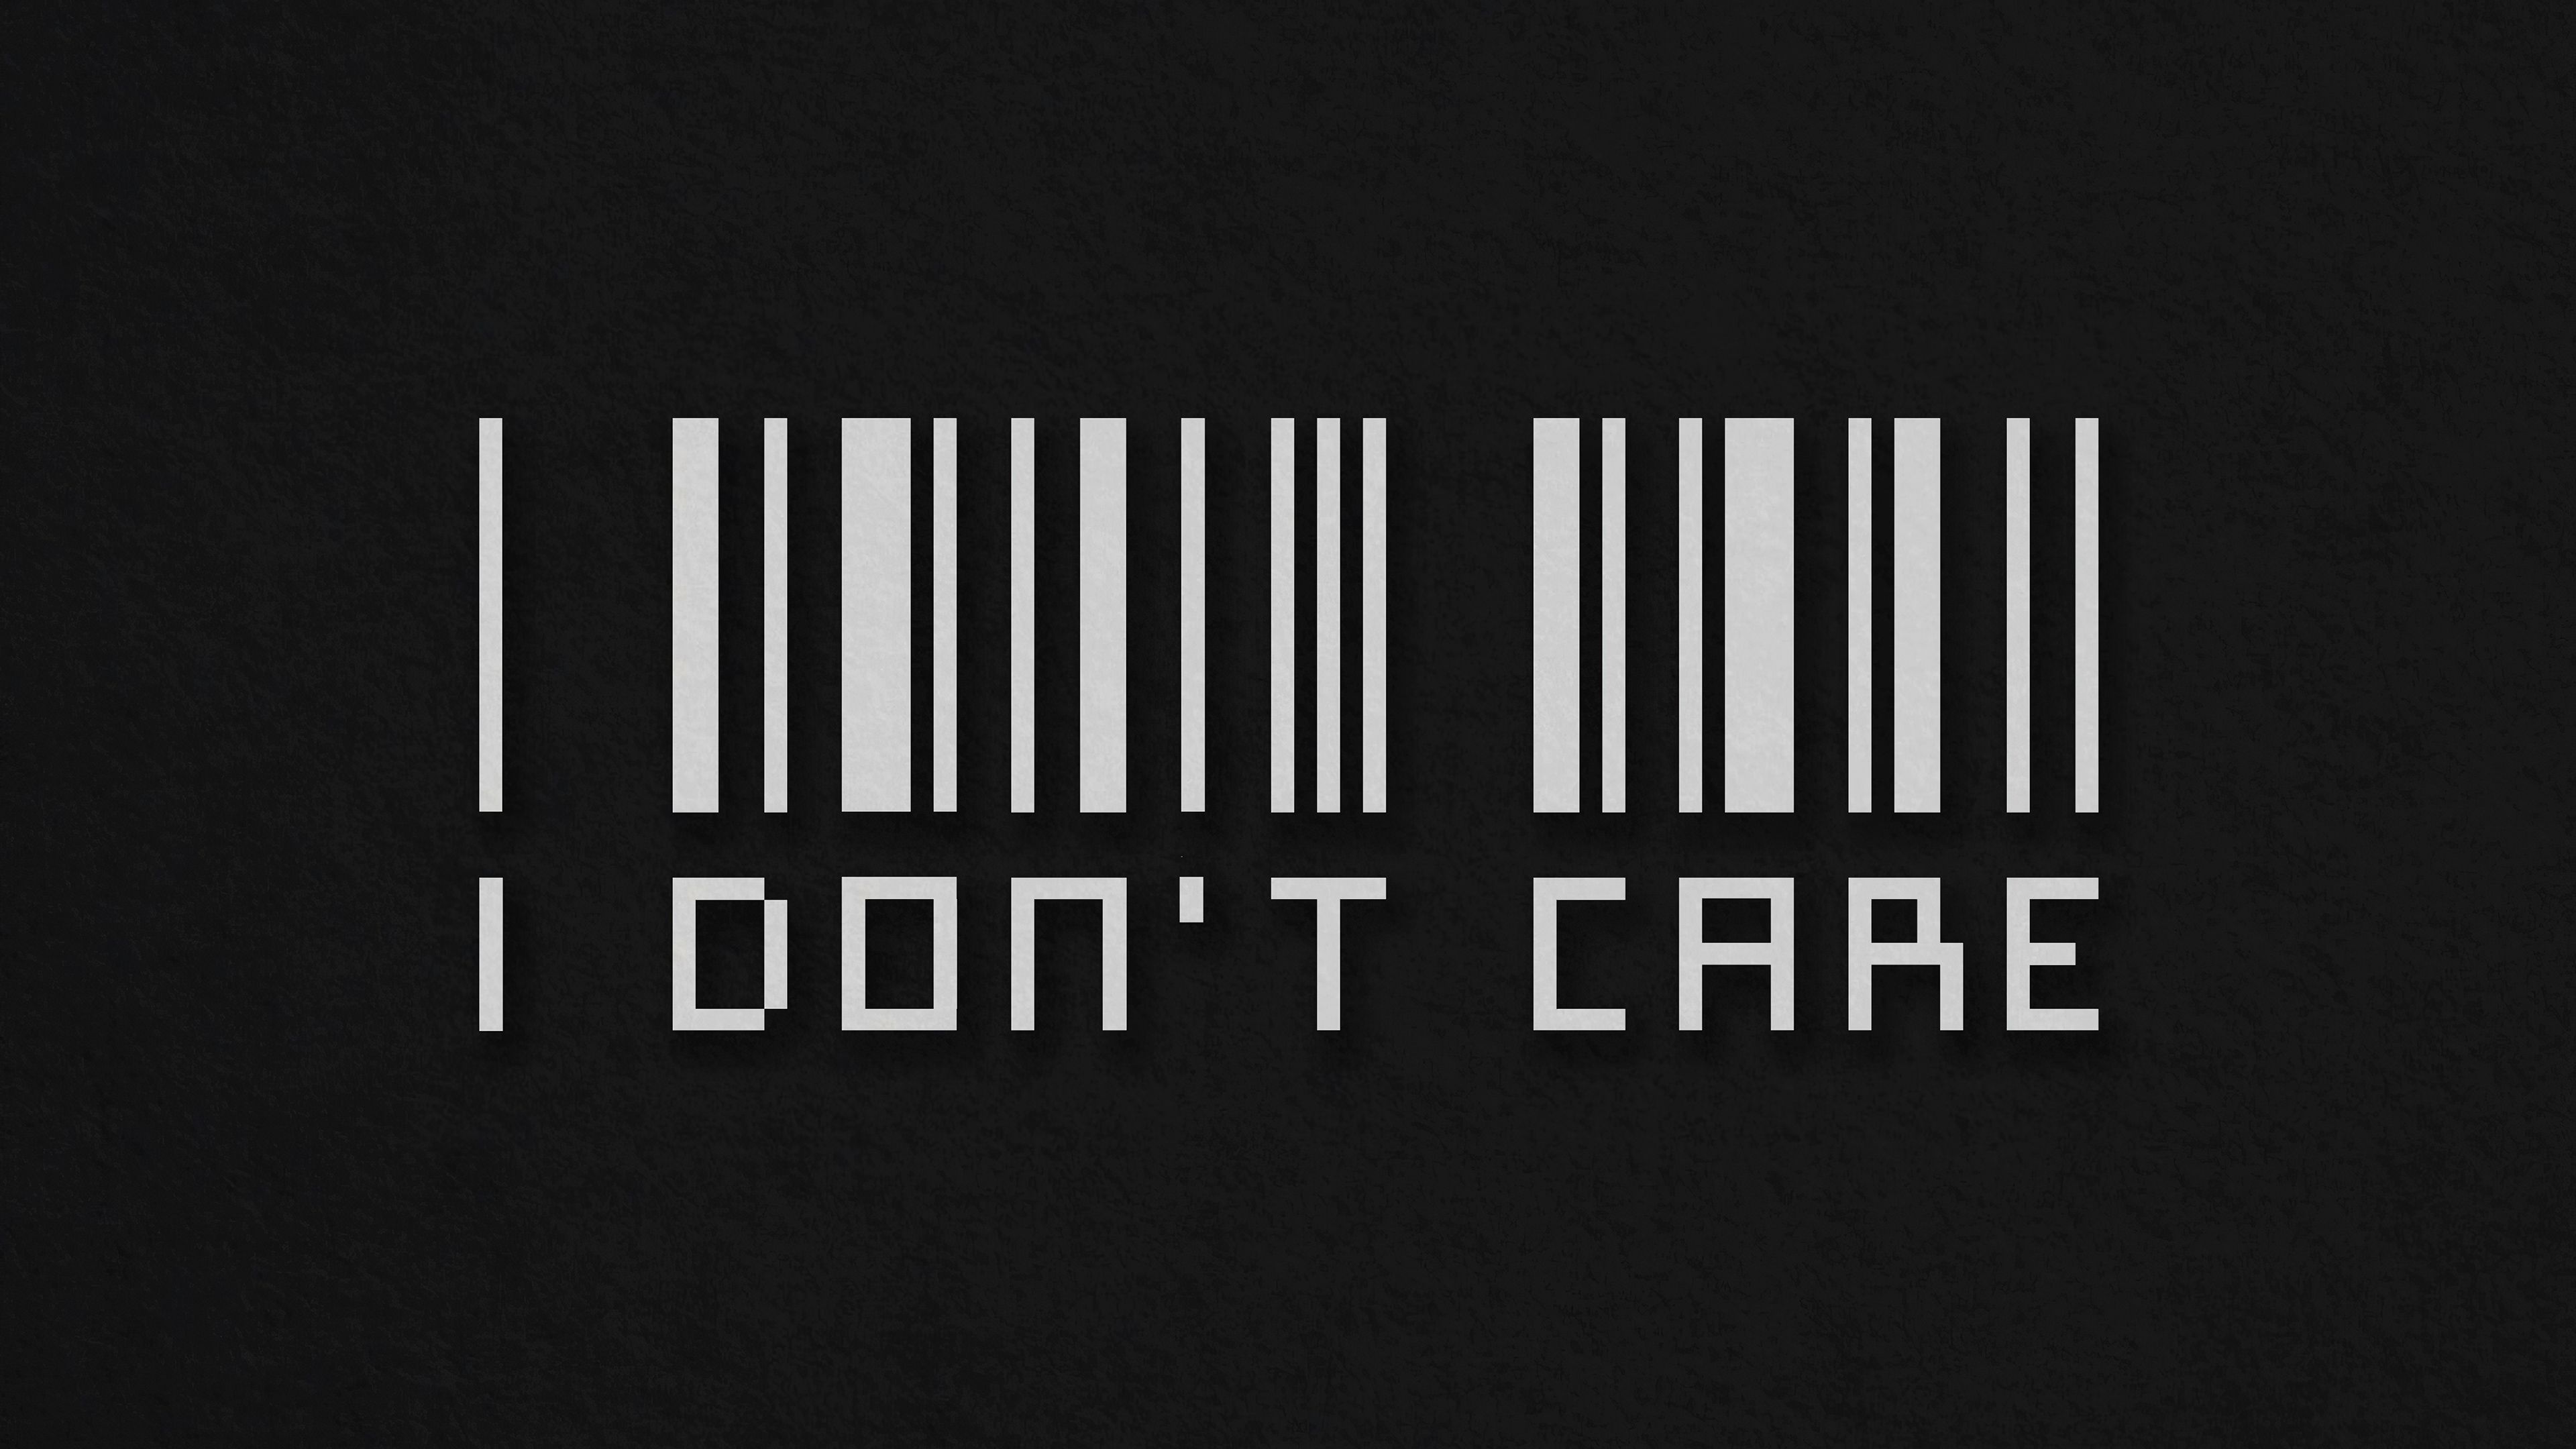 I Dont Care Wallpaper Free I Dont Care Background